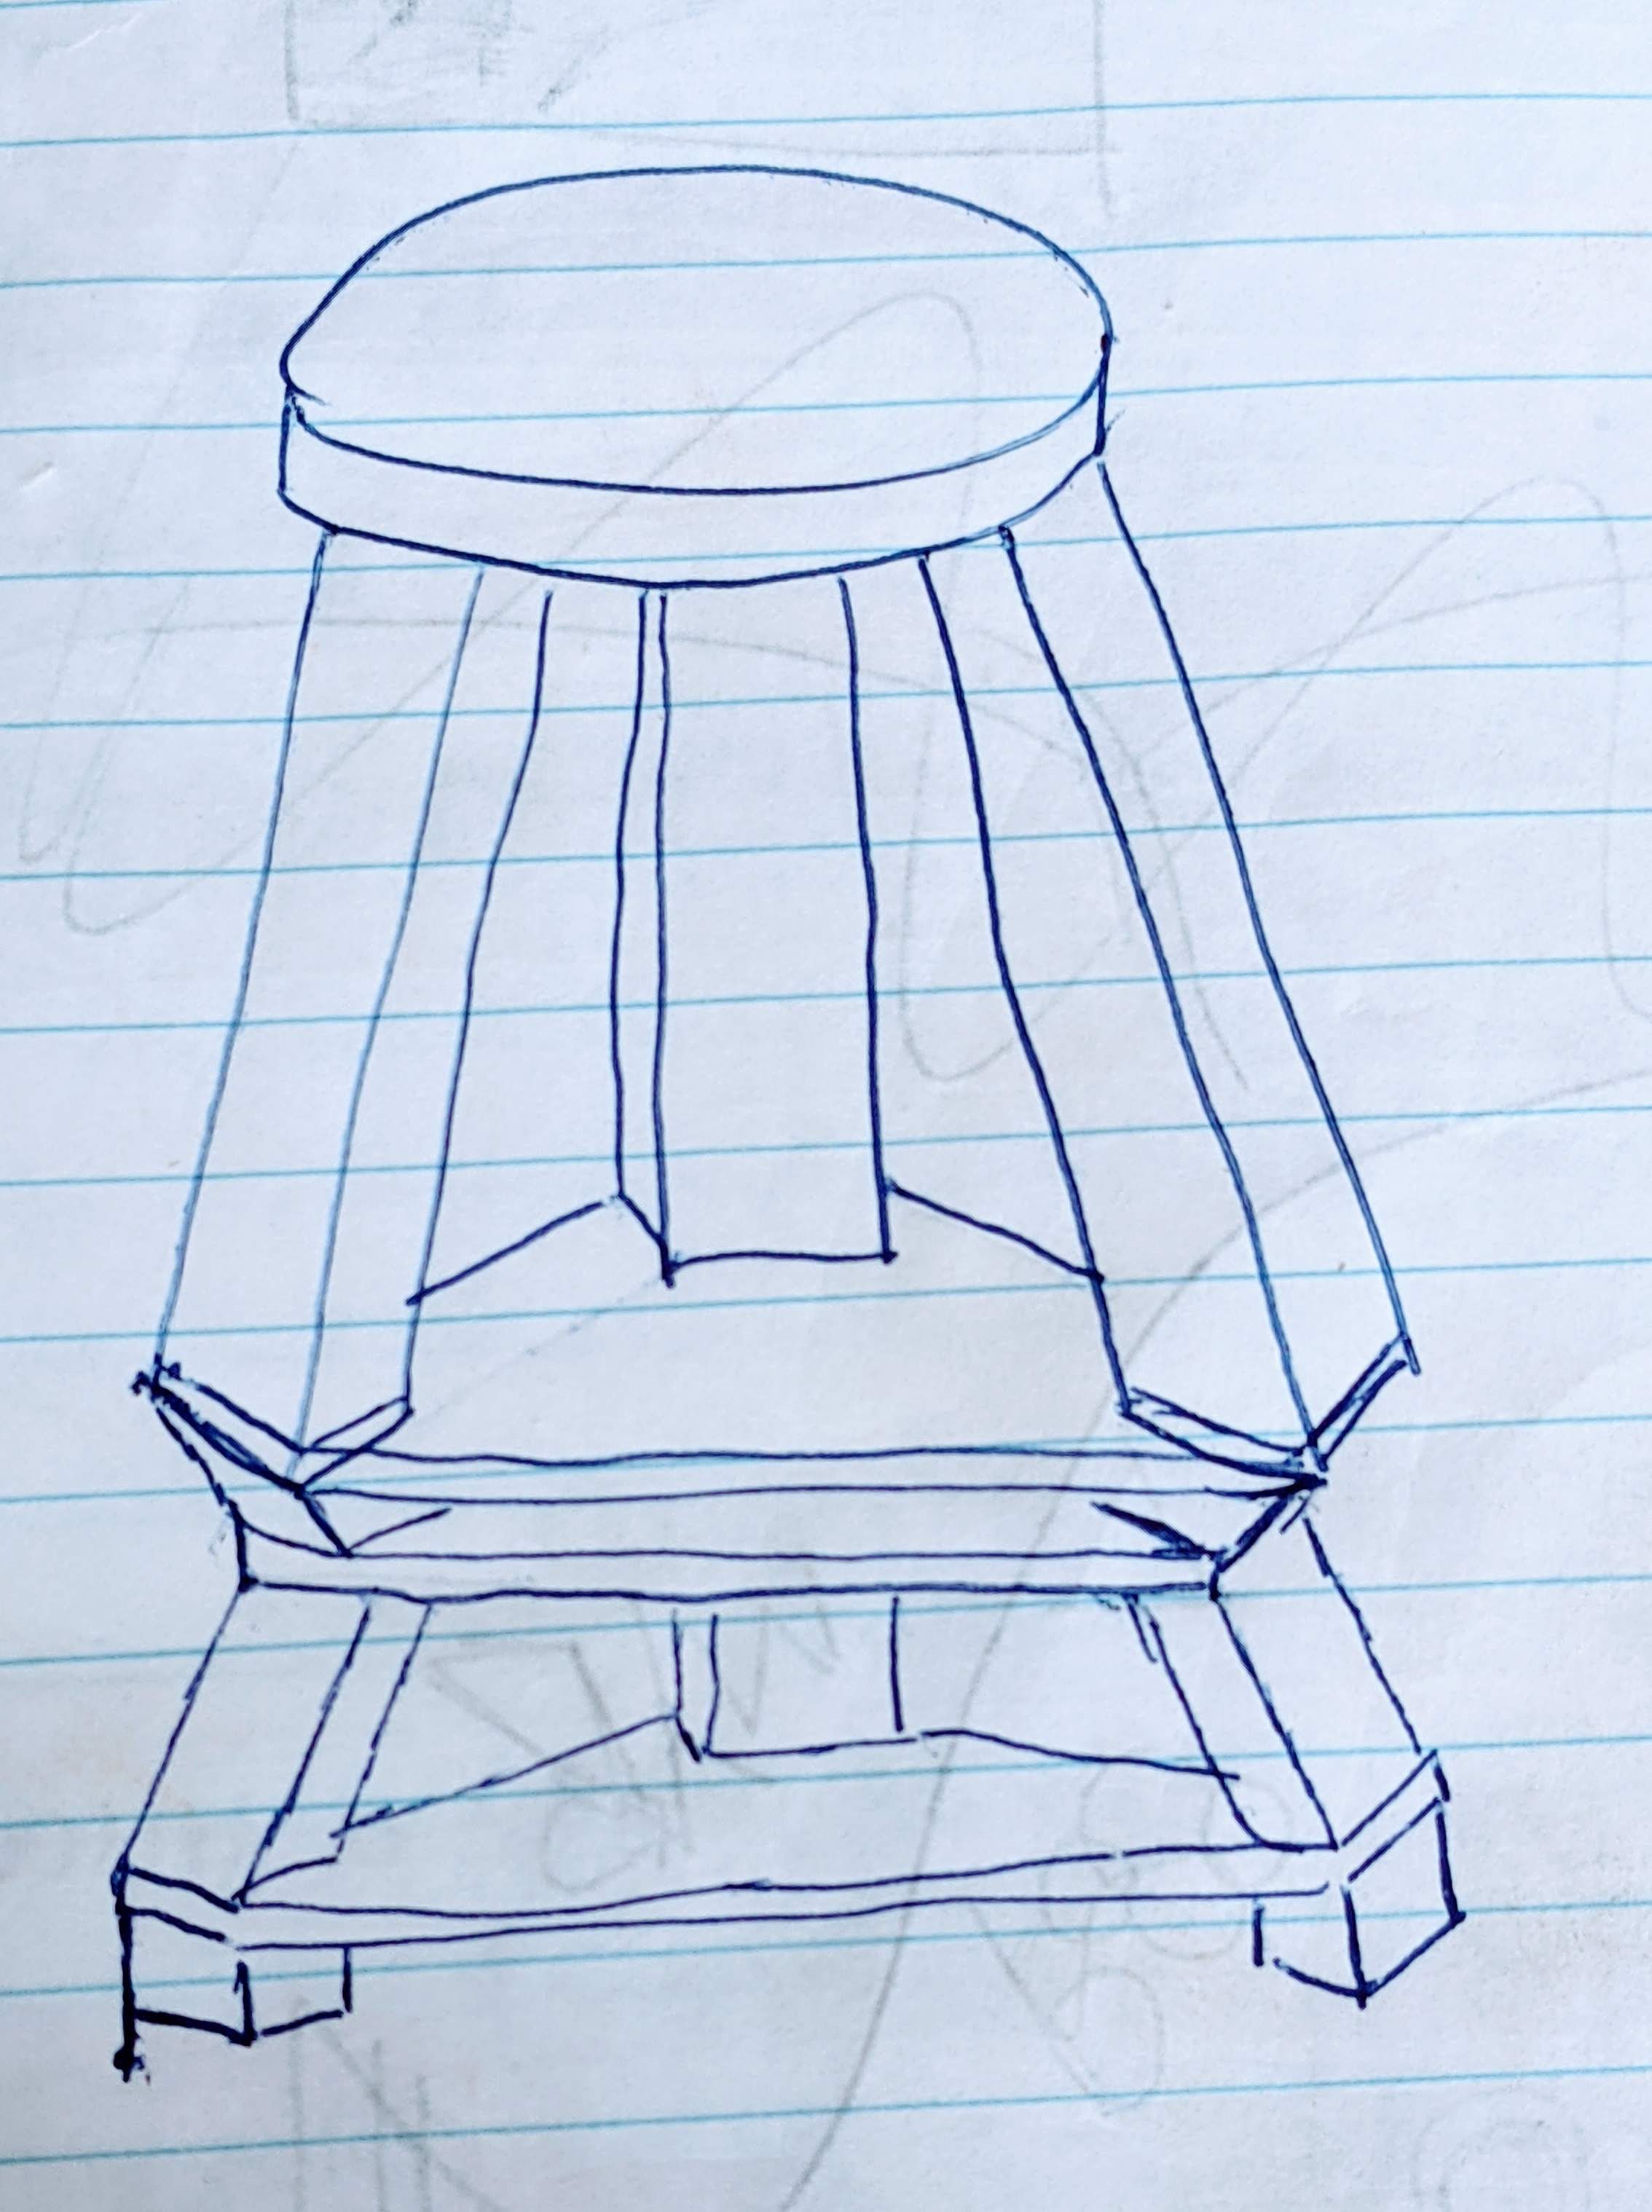 a sketch of a stool design with multiple tiers of legs